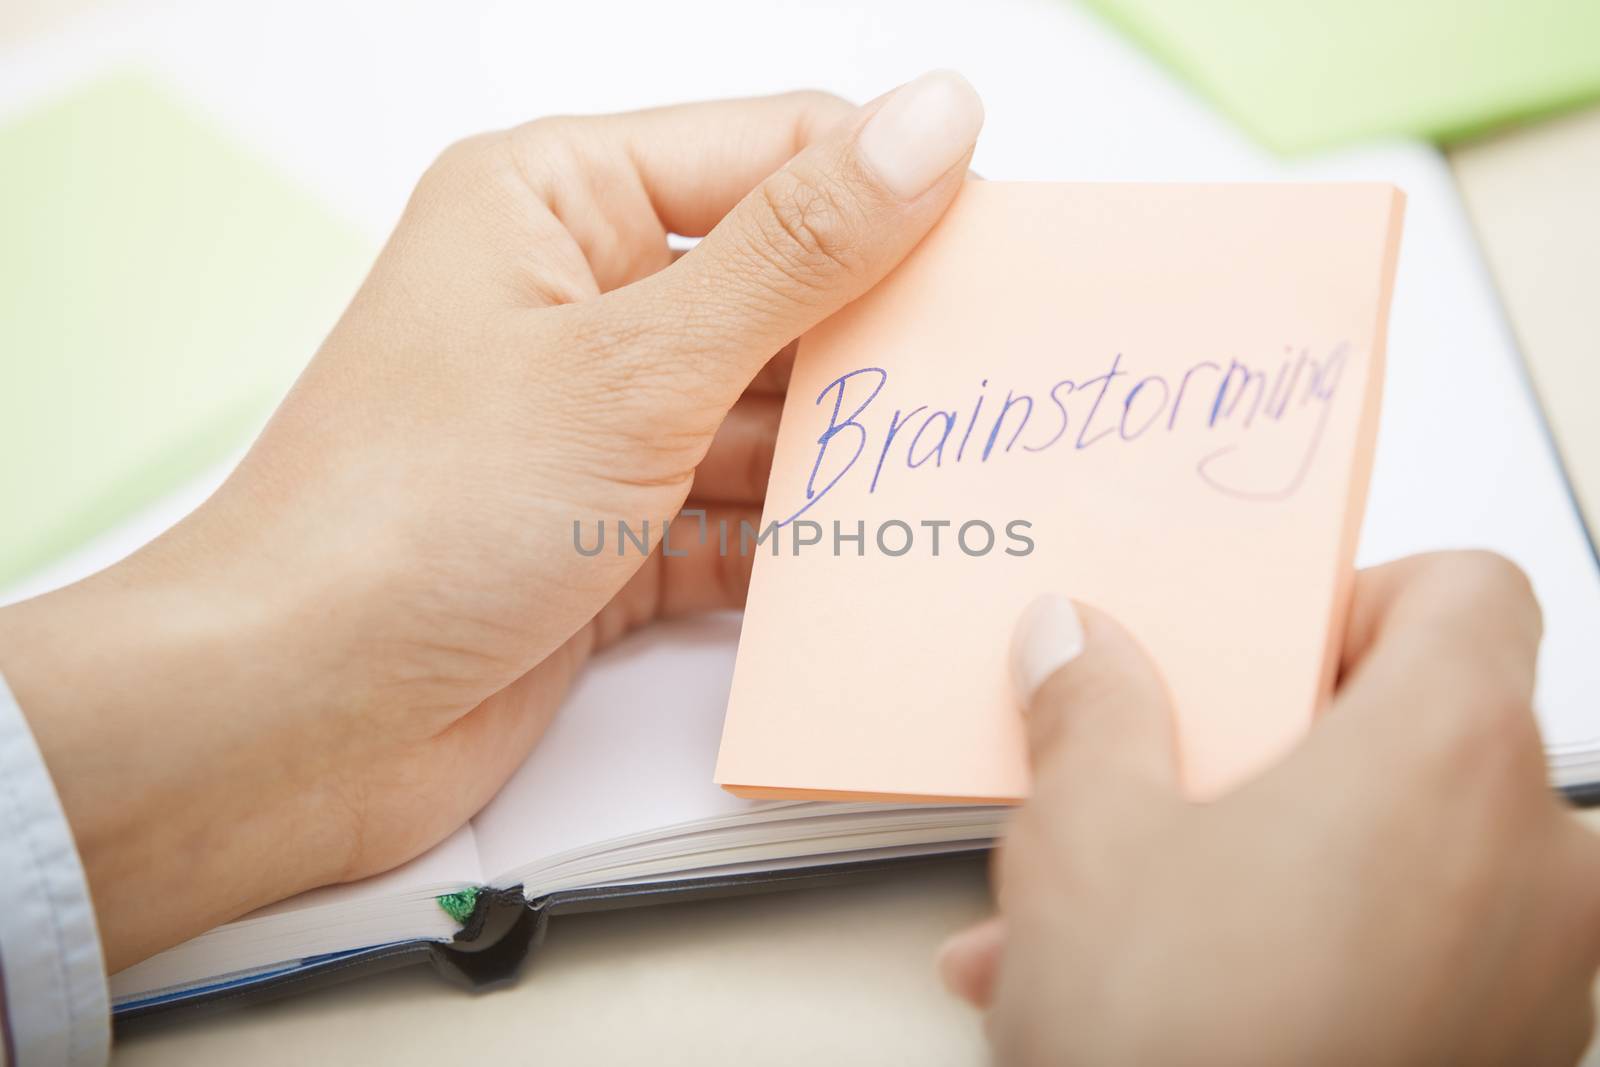 Brainstorming text on adhesive note by Novic